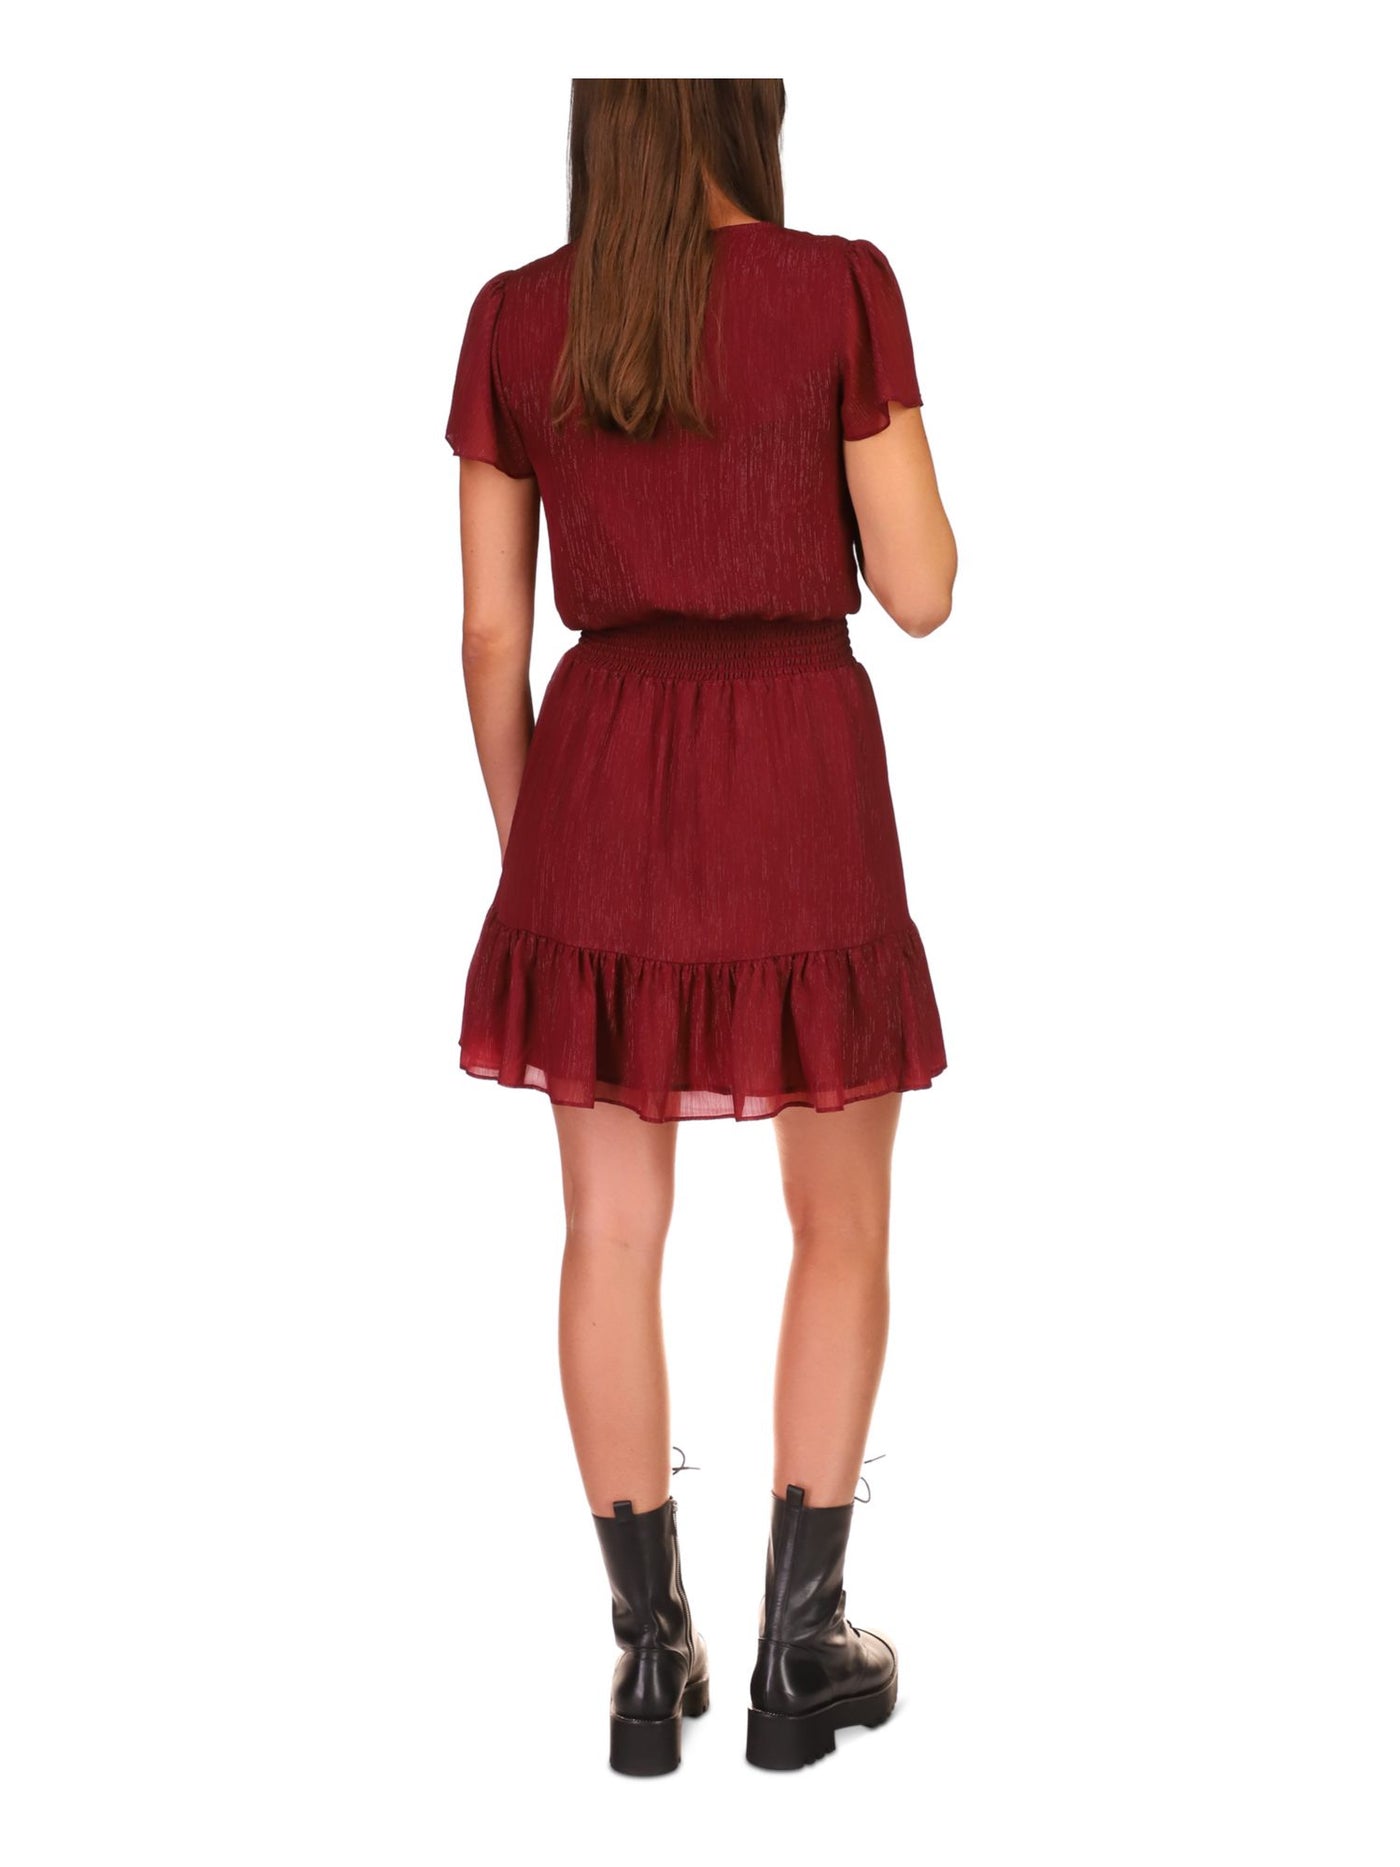 MICHAEL KORS Womens Maroon Smocked Sheer Lined Ruffled Hook And Eye Front Short Sleeve Surplice Neckline Above The Knee A-Line Dress XXL